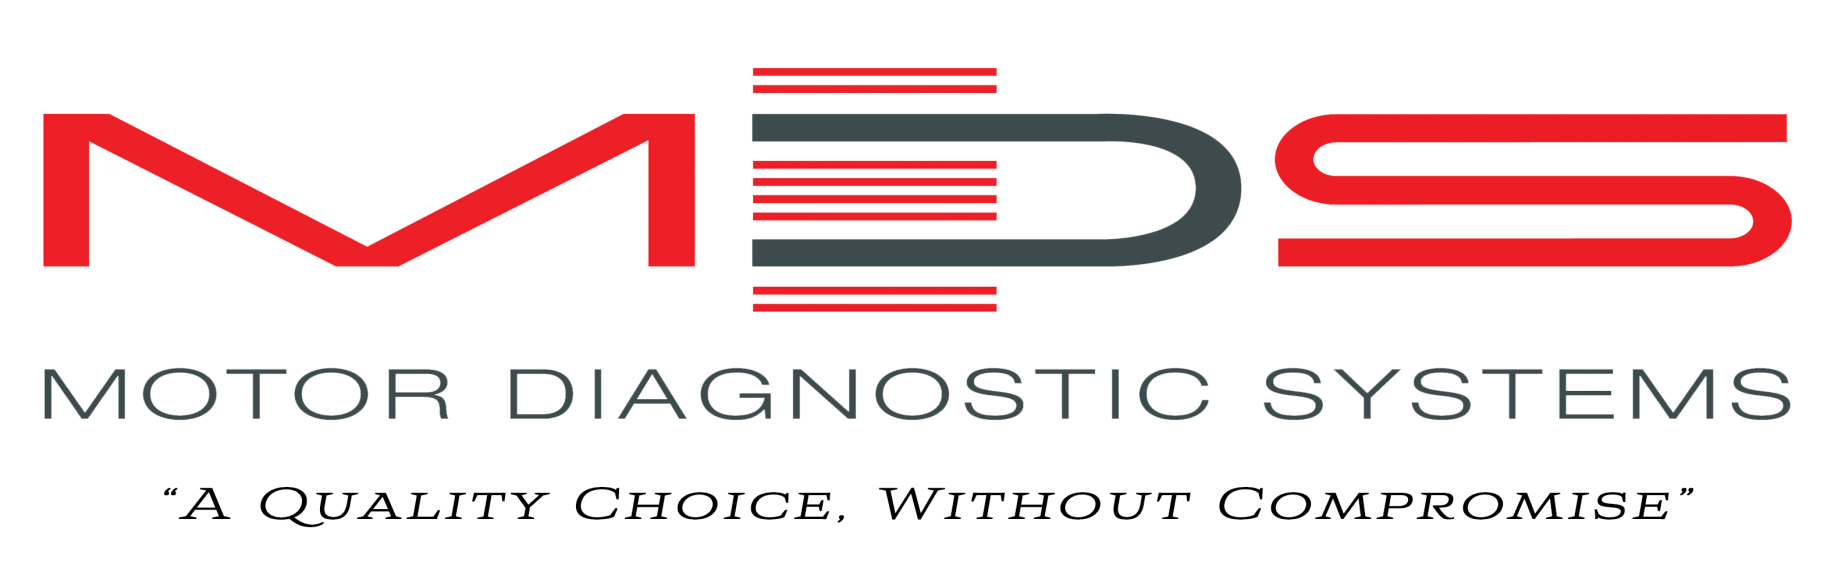 Motor Diagnostic Systems Logo Home Page